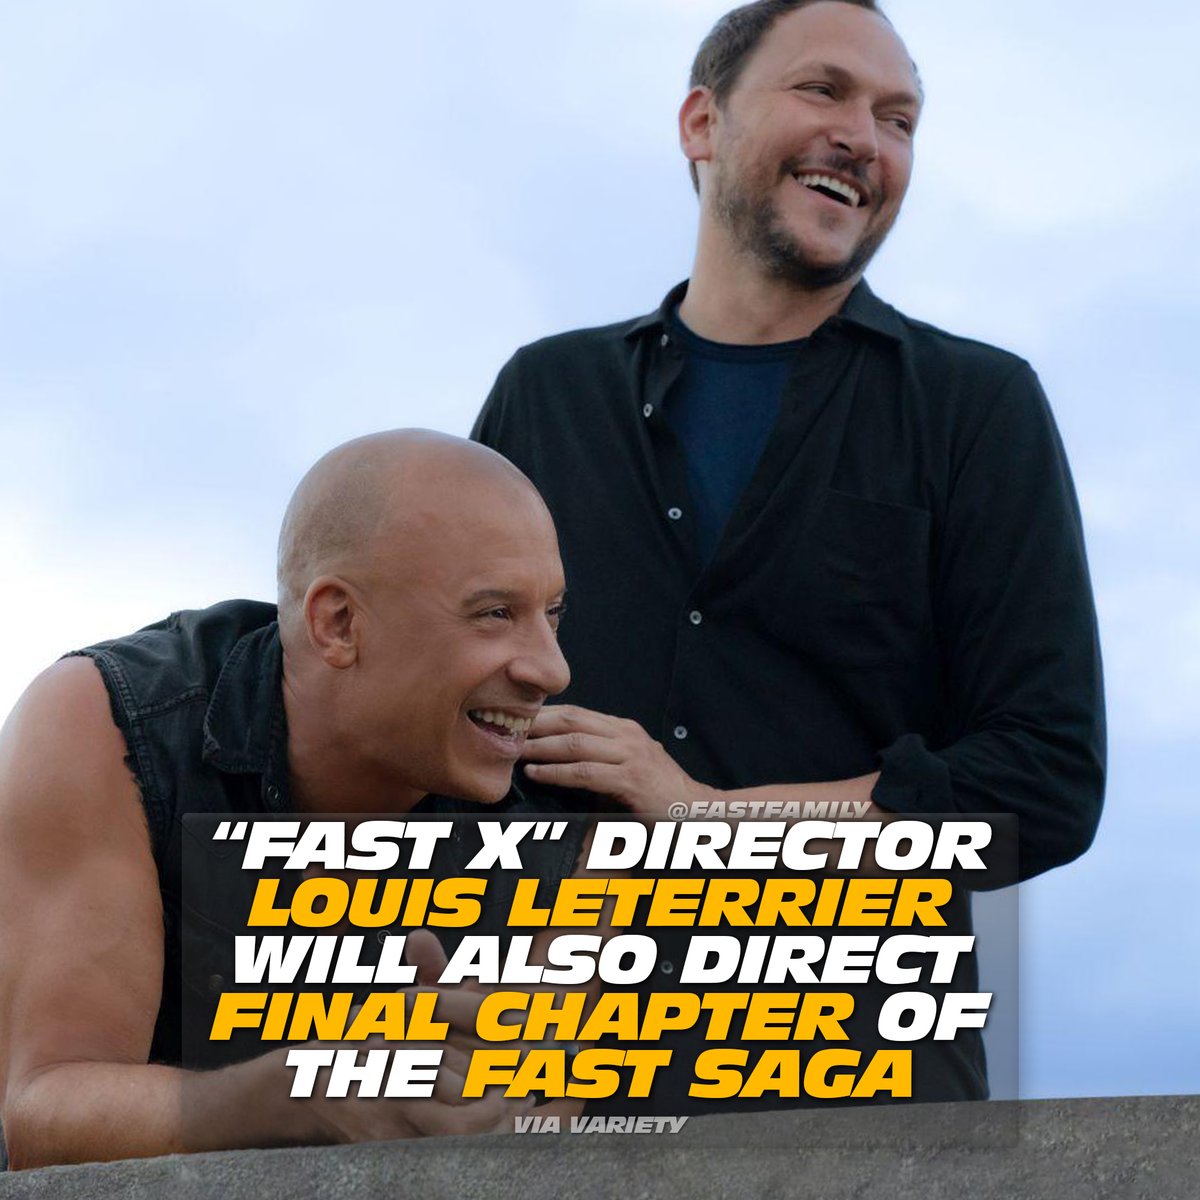 ⚡ The grand finale of @TheFastSaga will also be directed by #FASTX director #LouisLeterrier. #FastFamily